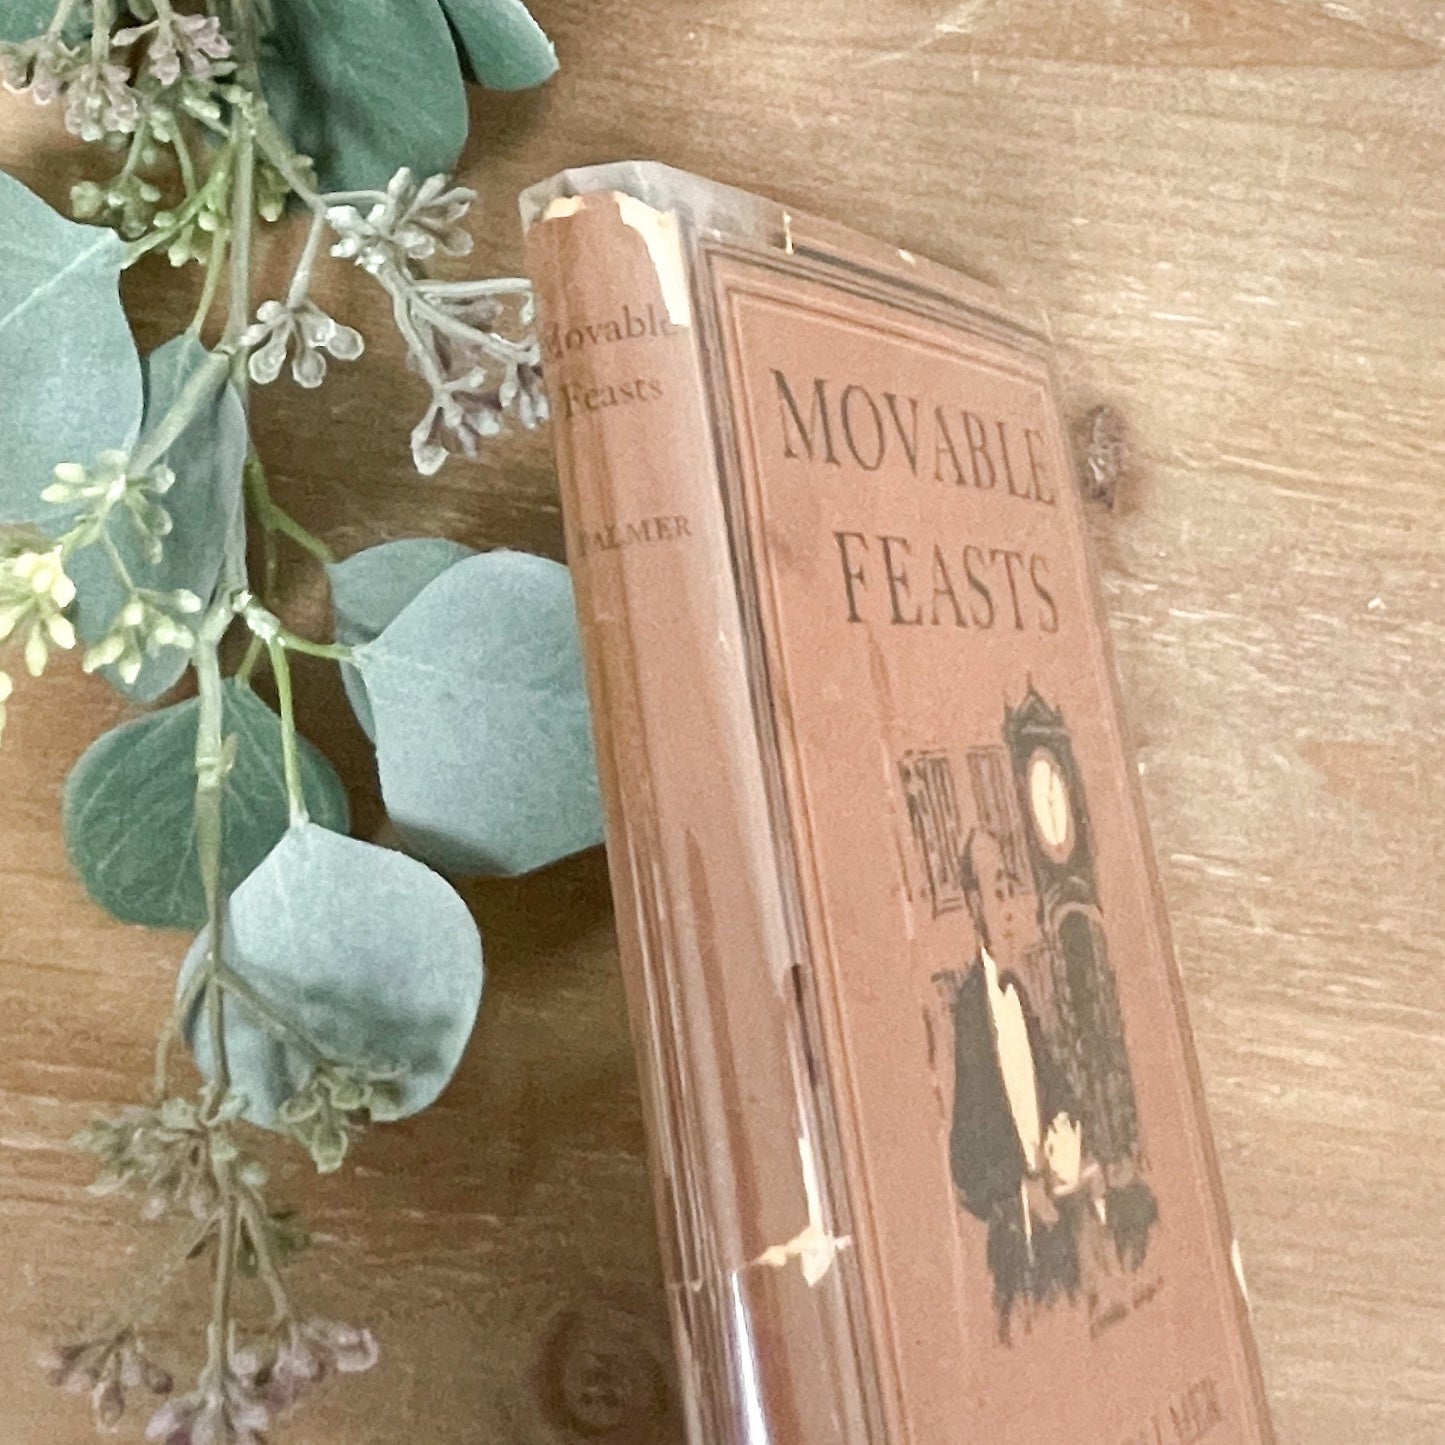 Old Book, Book for Collection, Book for Decor, Movable Feasts by Arnold Palmer